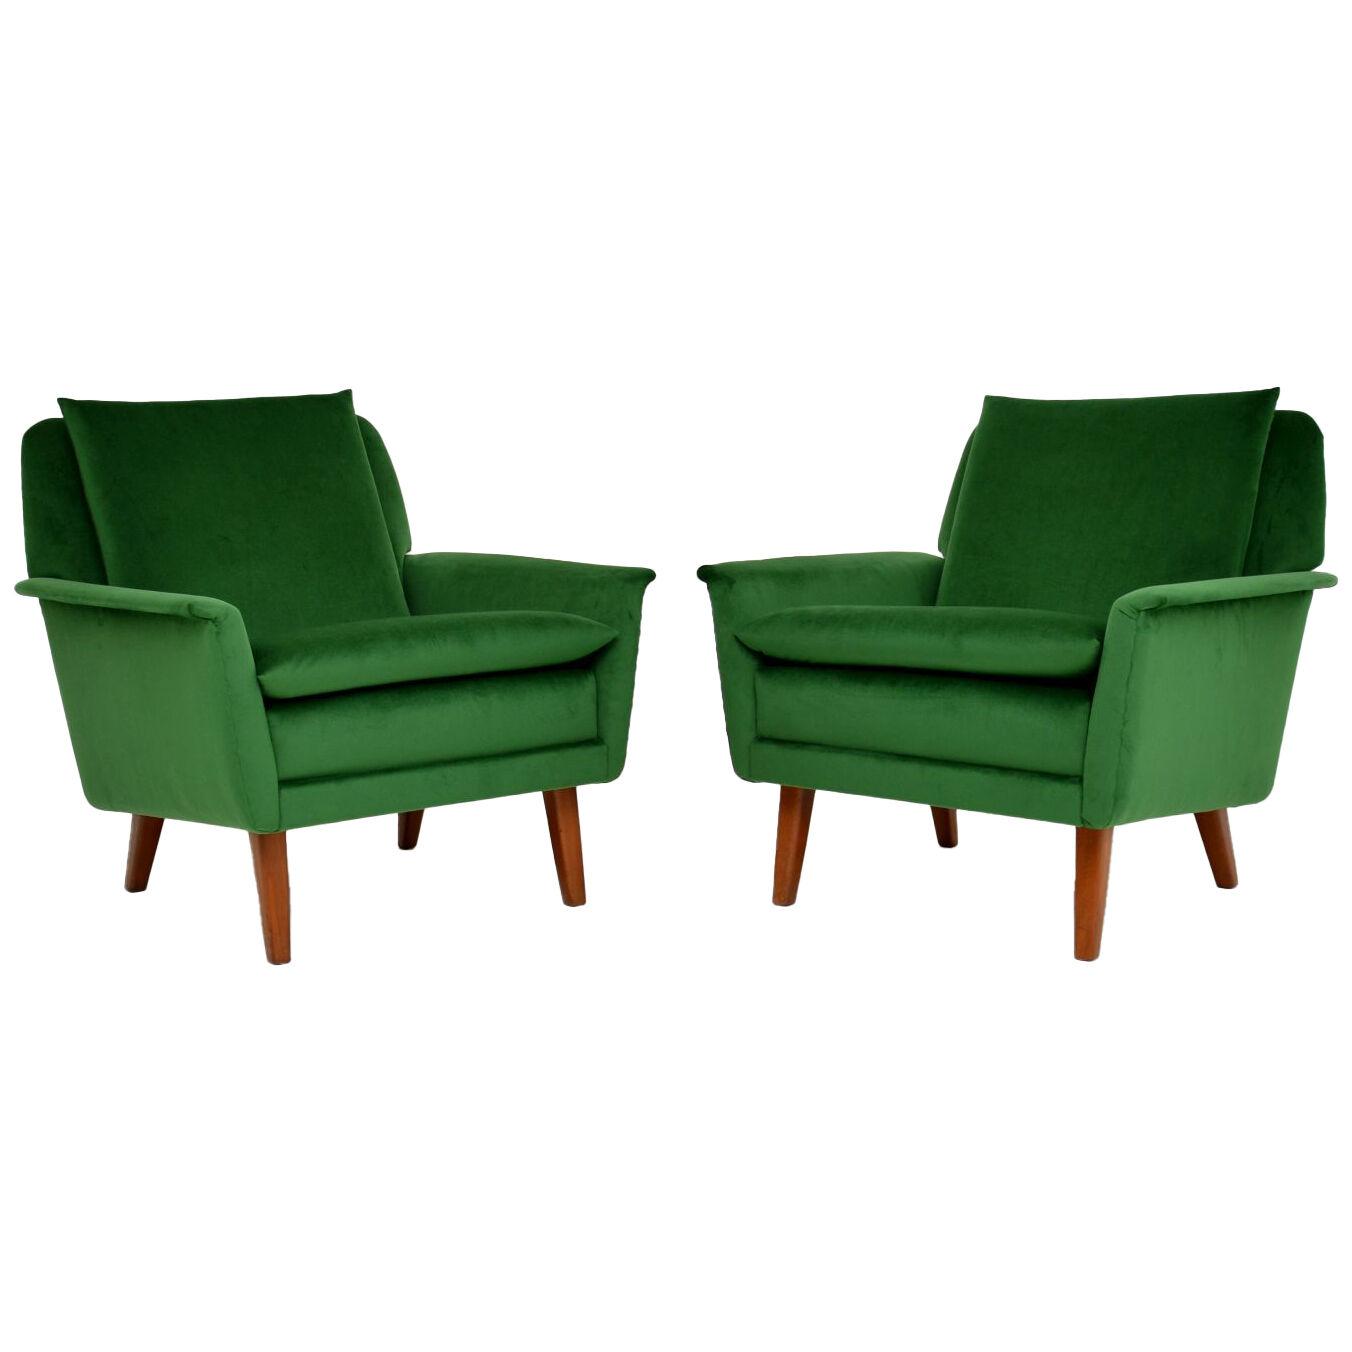 1960's Pair of Swedish Armchairs by Folke Ohlsson for Dux